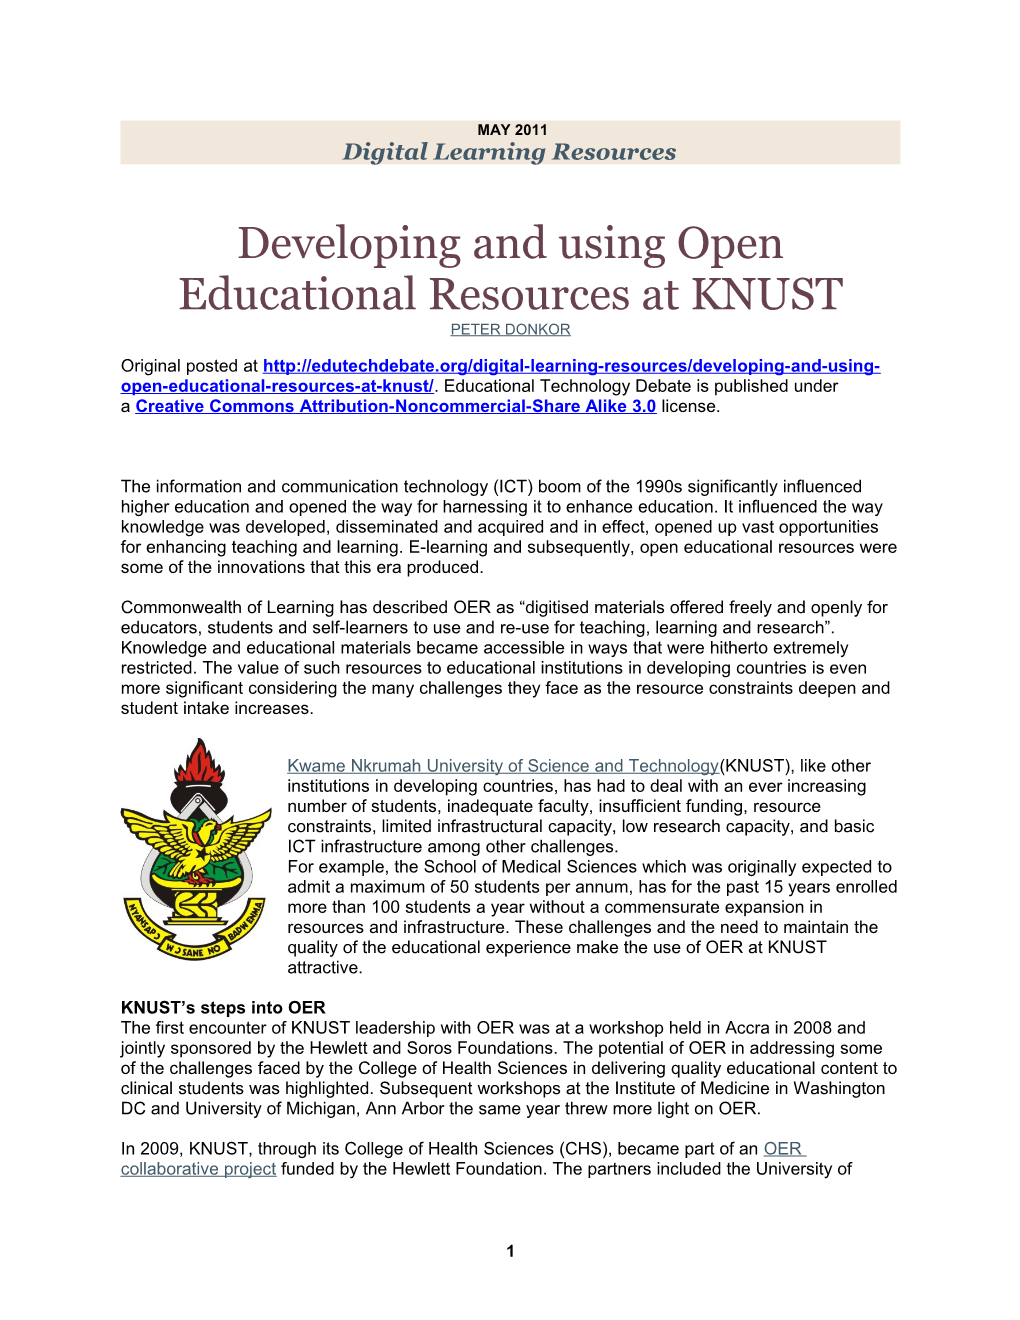 Developing and Using Open Educational Resources at KNUST